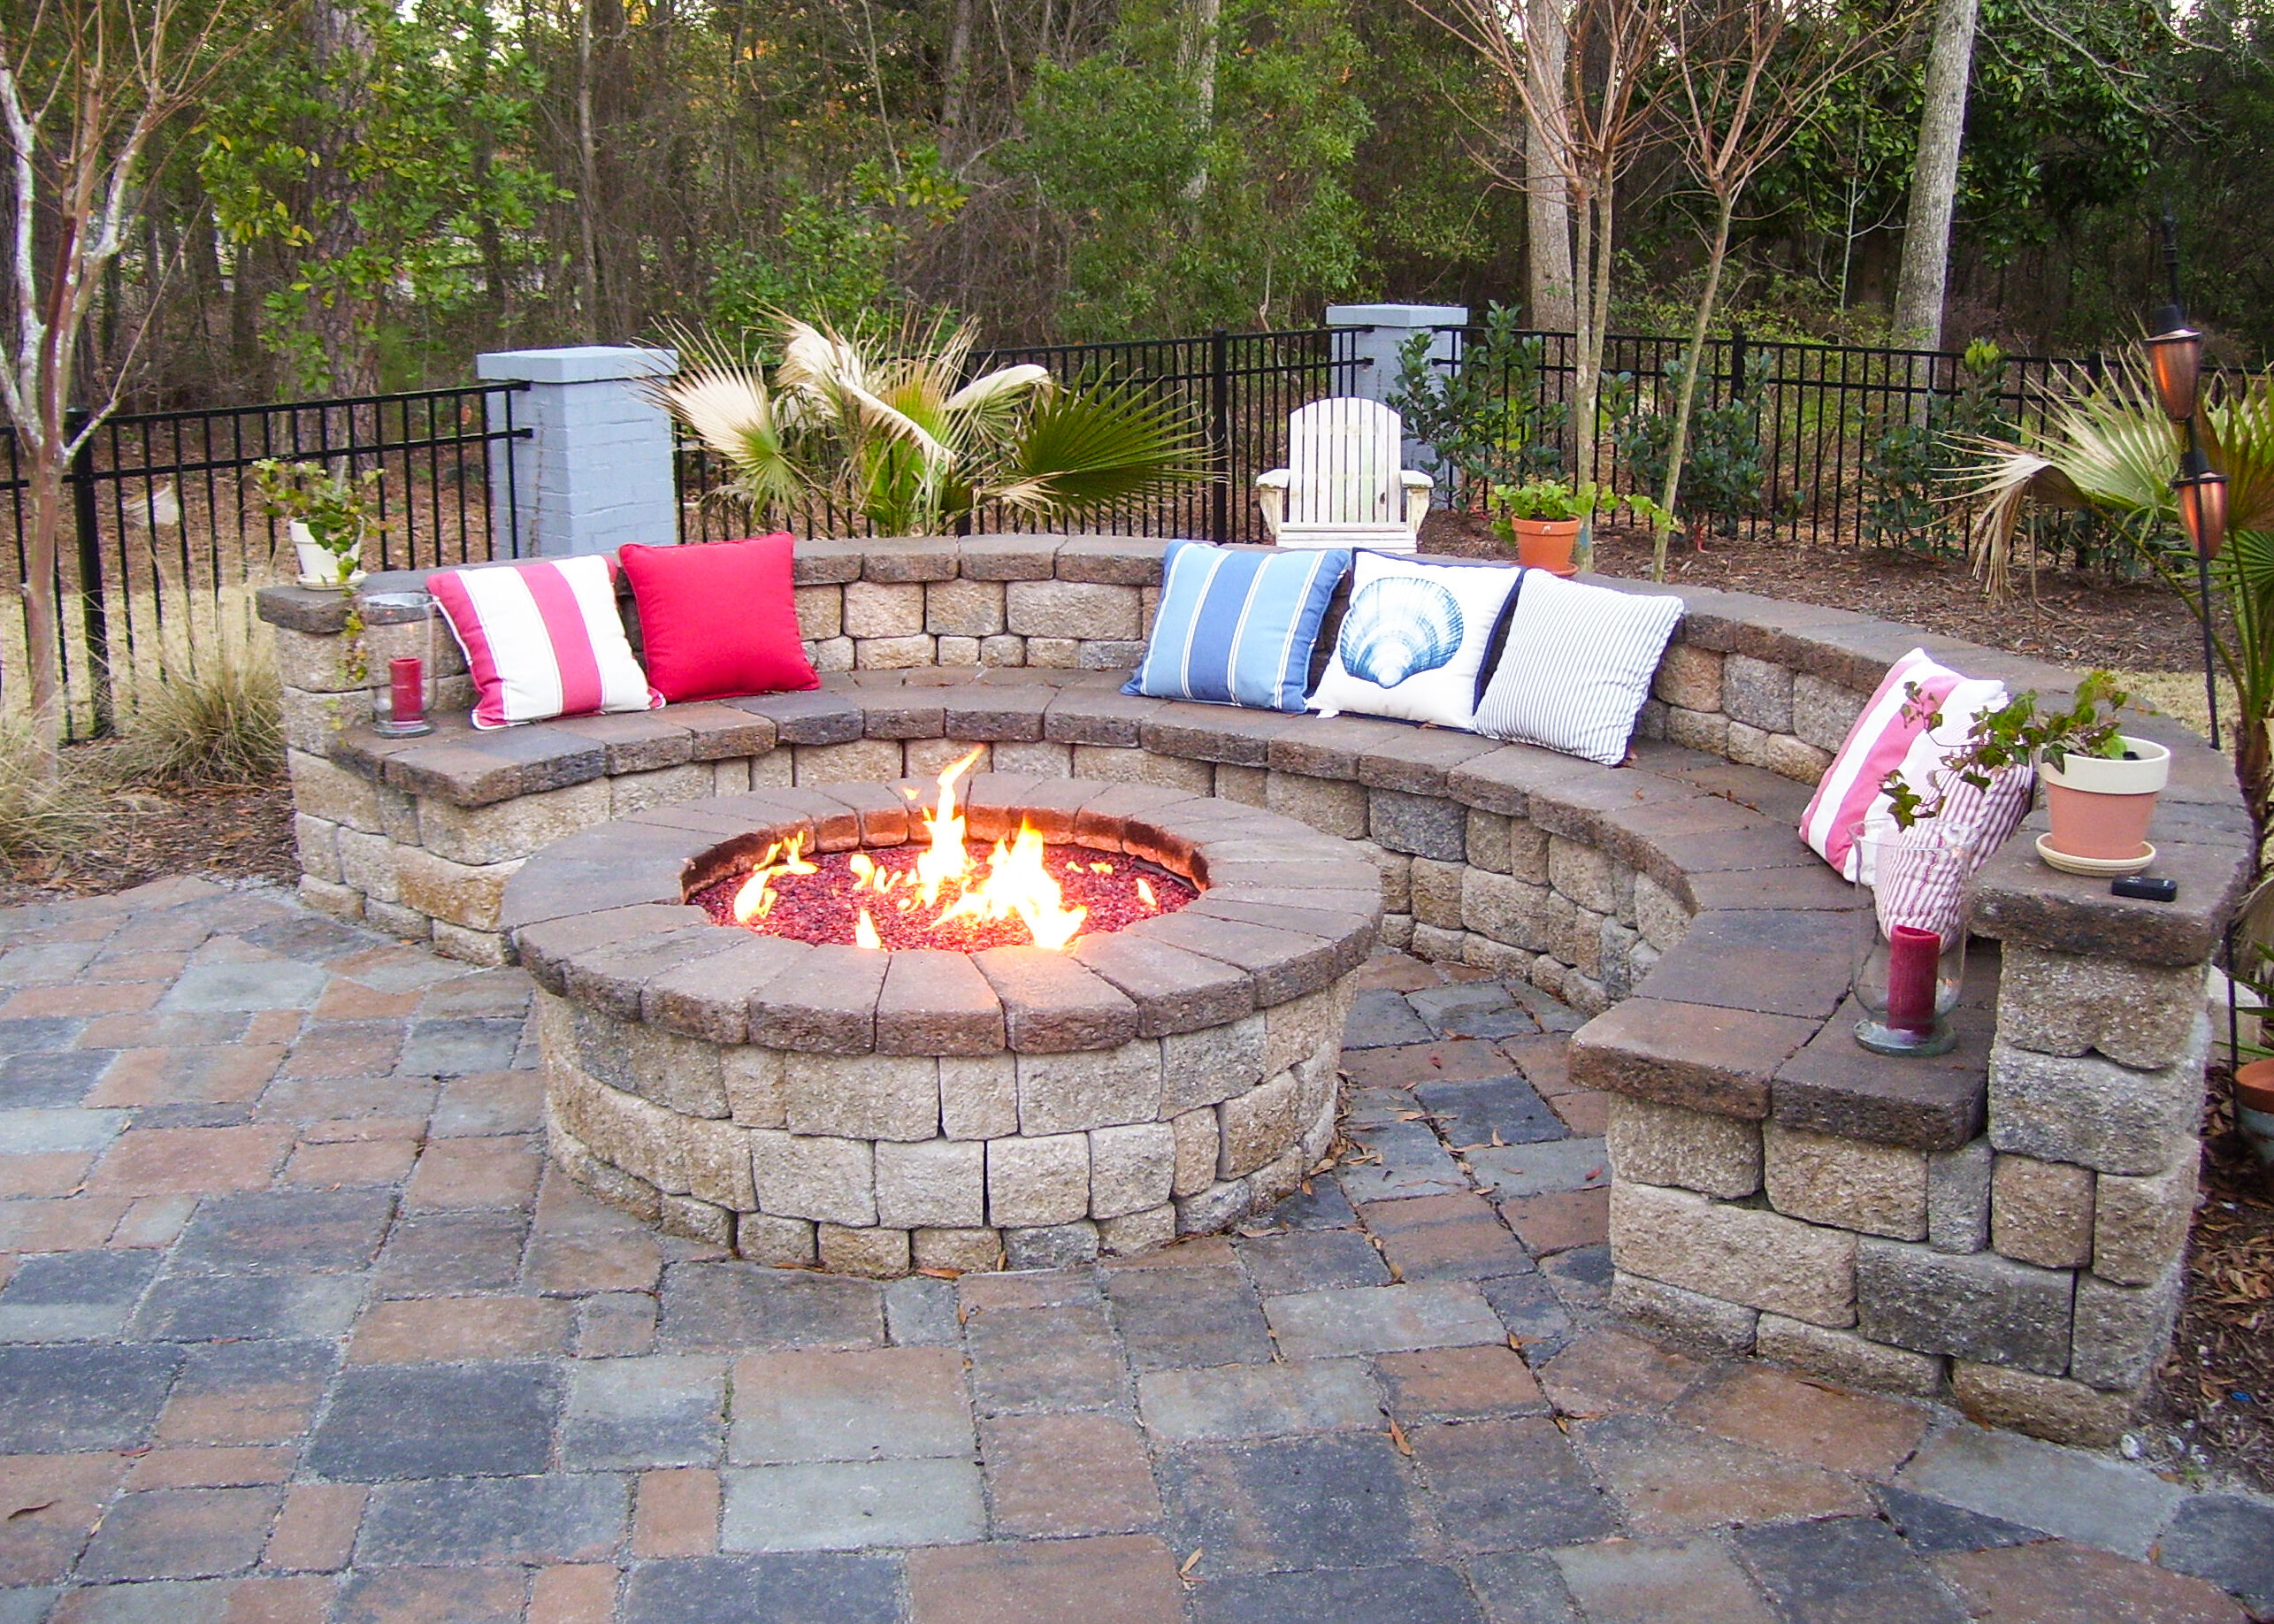 Save time and money with these simple do-it-yourself fire pit kits! 